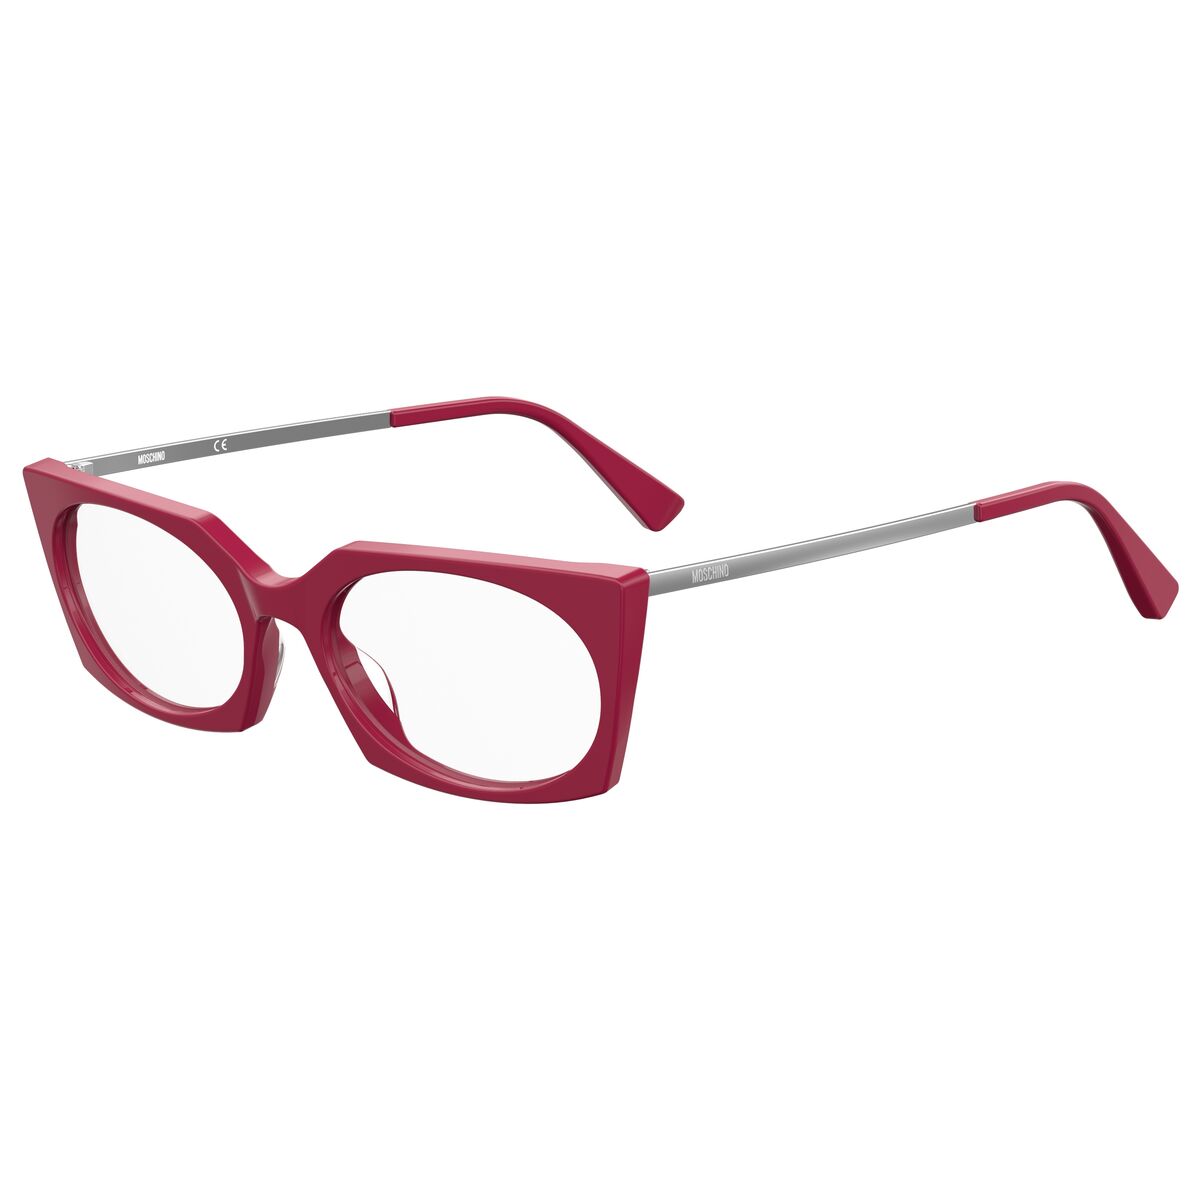 Ladies' Spectacle frame Moschino MOS570-LHF ø 54 mm